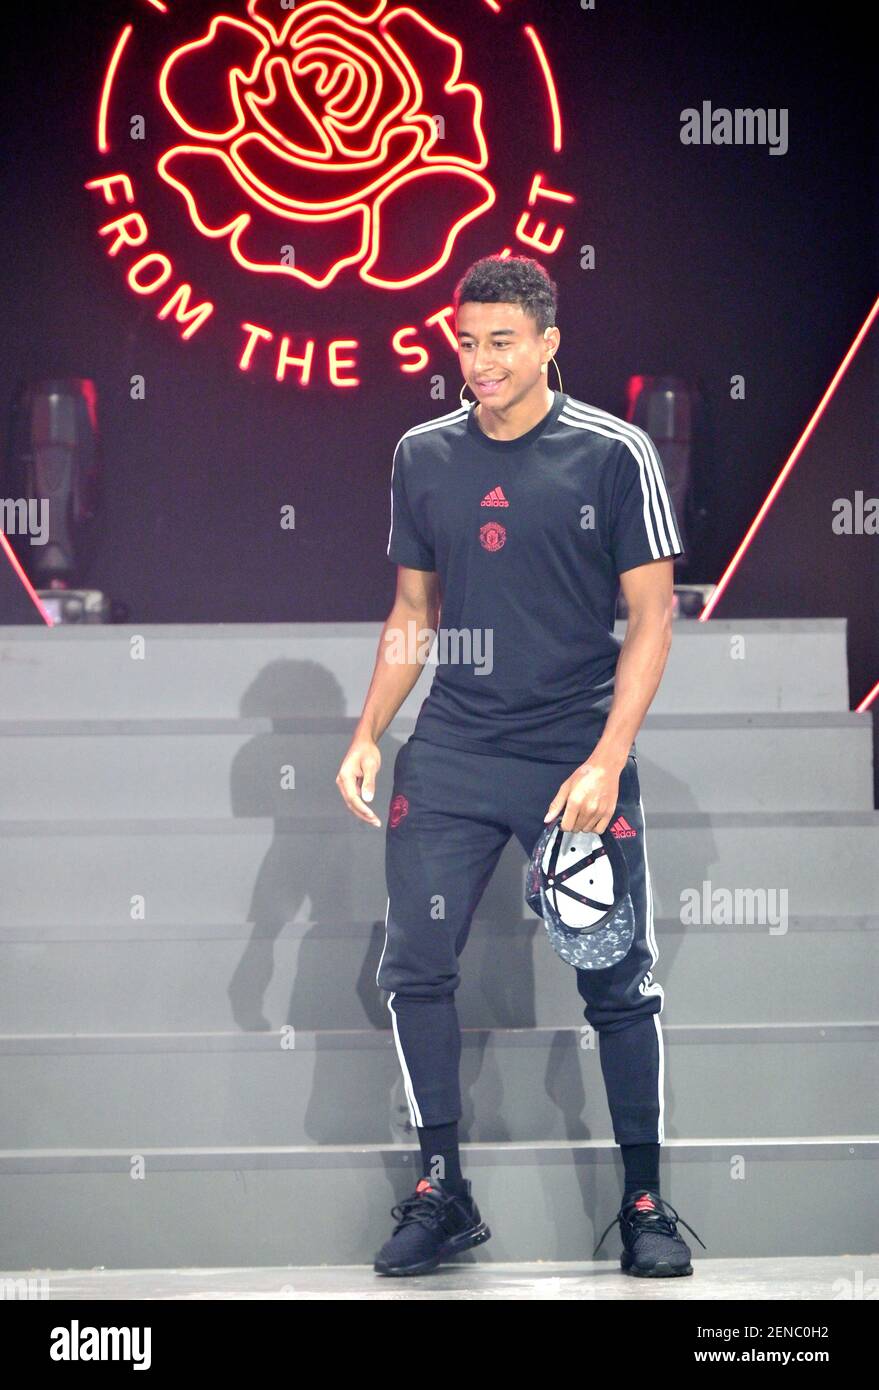 Jesse Lingard of Manchester United F.C. of Premier League attends a  promotional event for adidas during 2019 pre-season tour in Shanghai,  China, 23 July 2019. (Photo by Ye liangjun - Imaginechina/Sipa USA